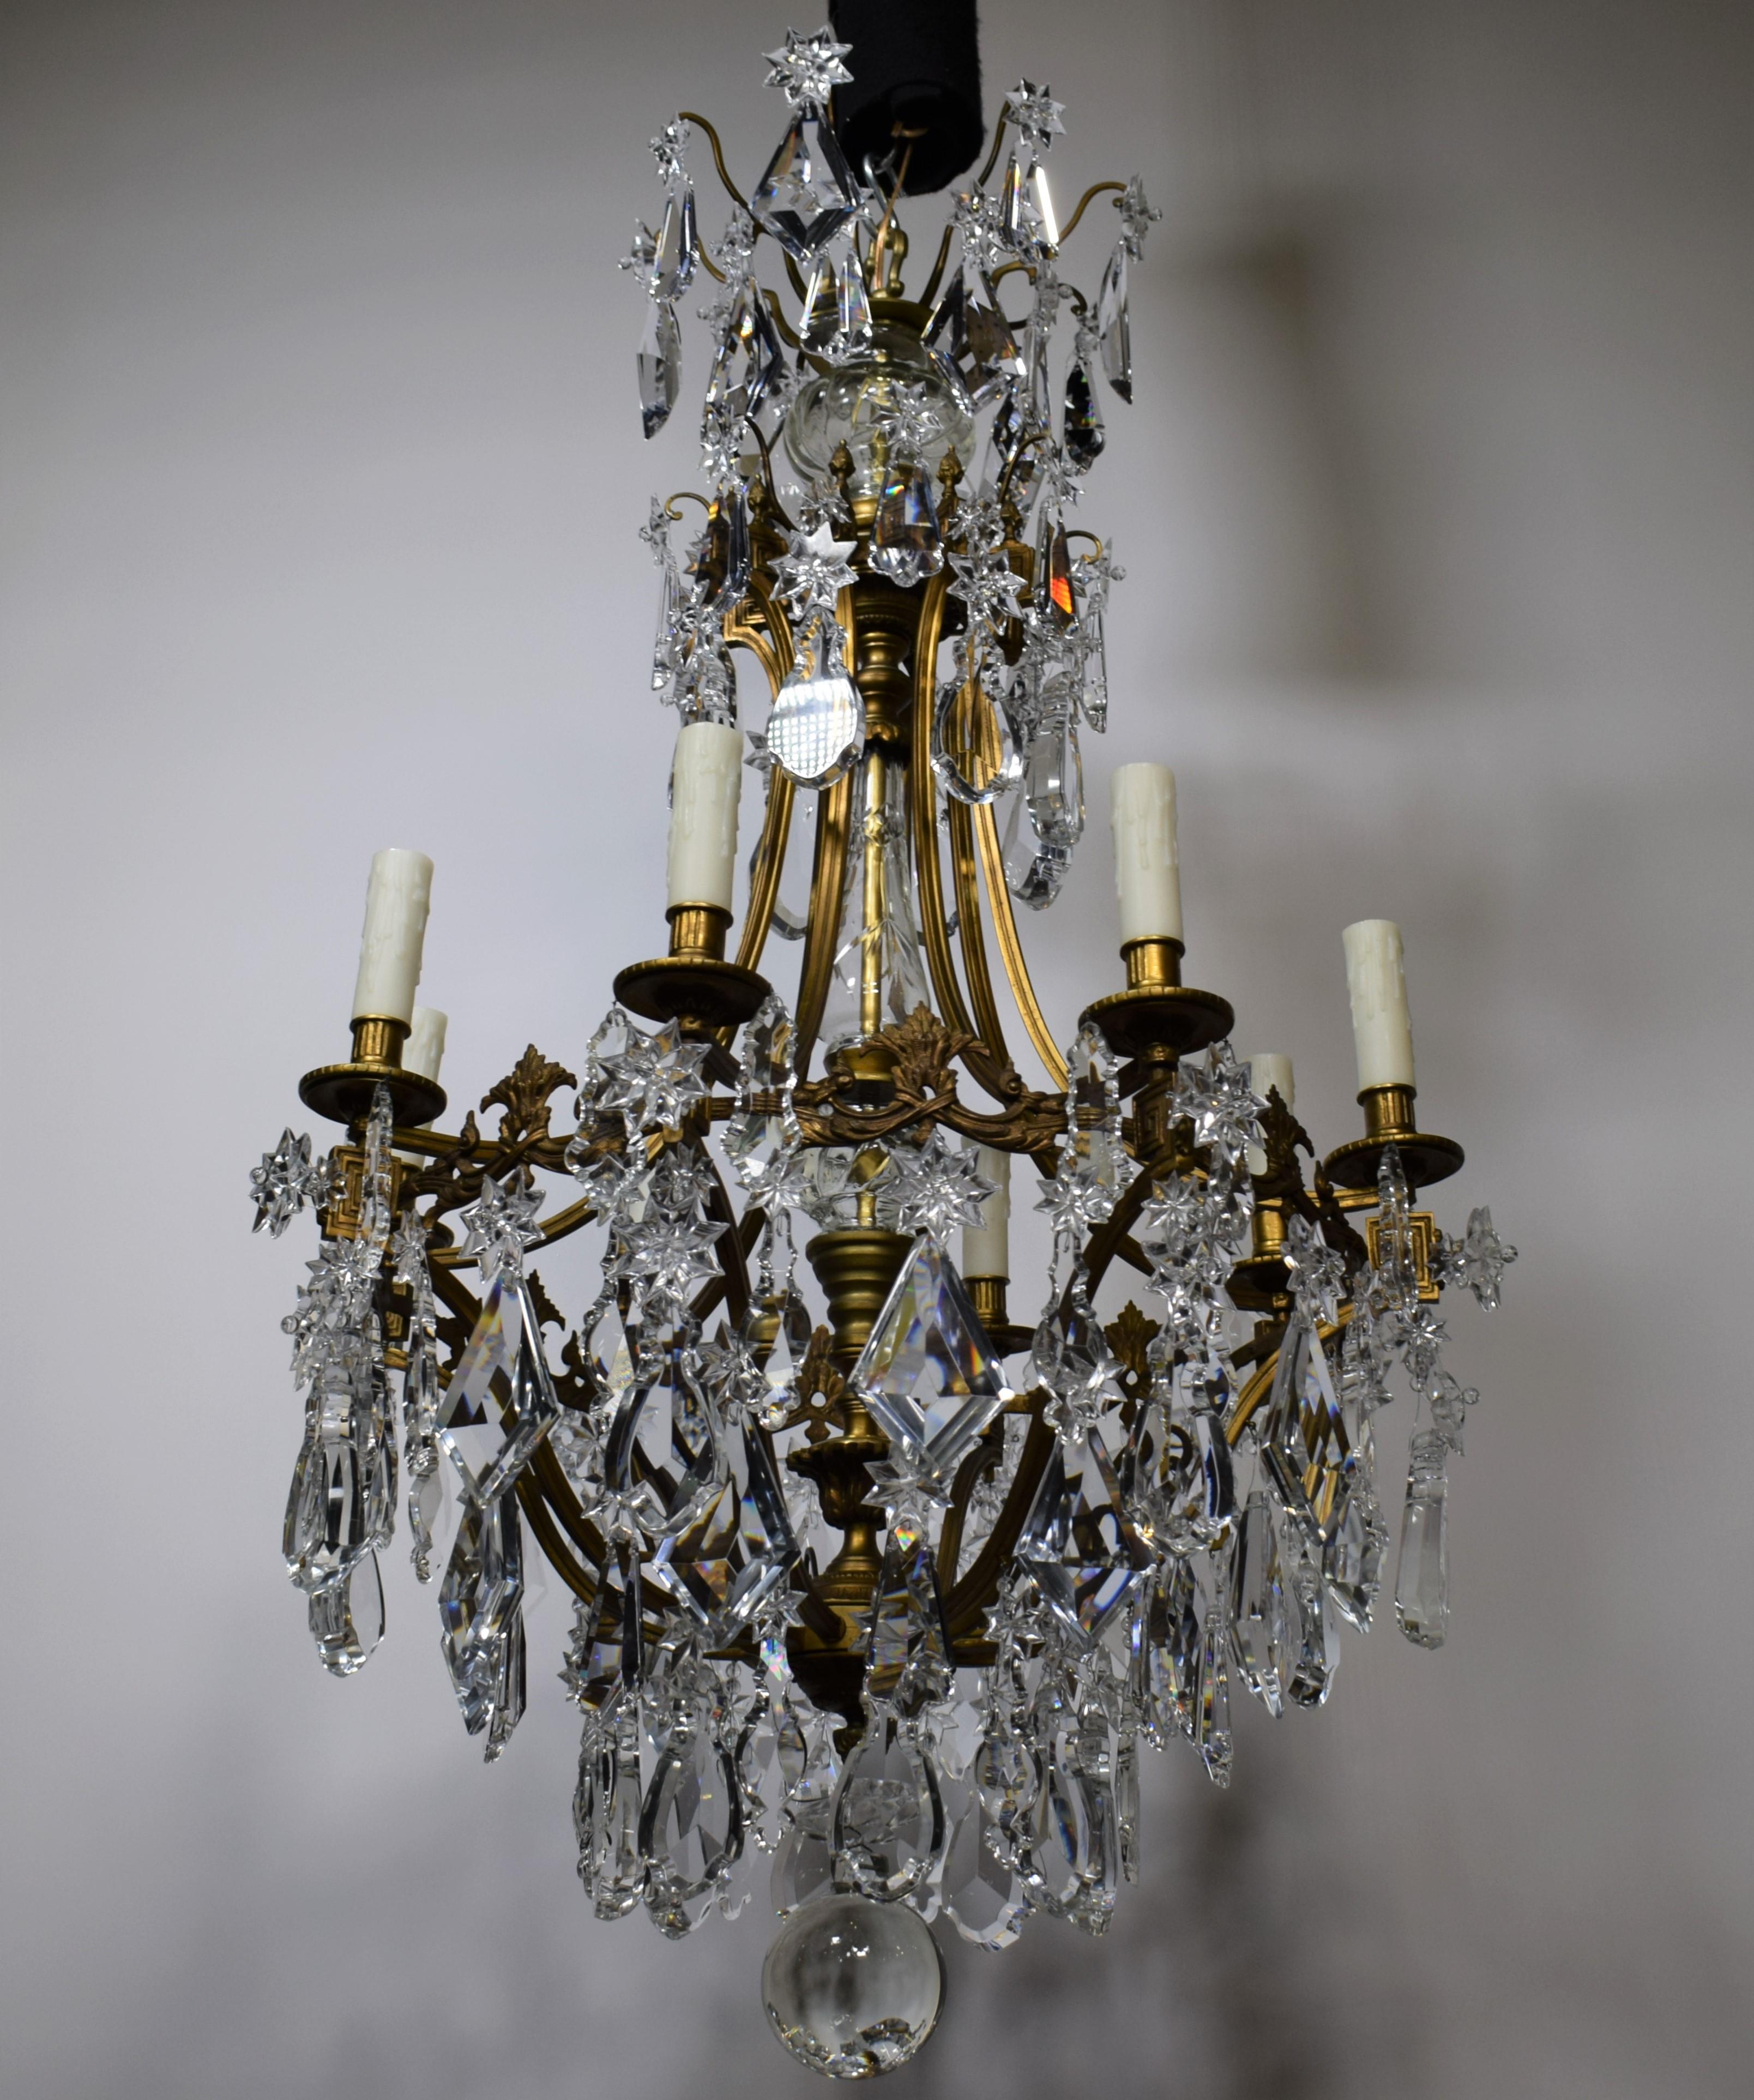 A very fine gilt bronze & crystal chandelier by Baccarat. 8 lights, France, circa 1910.
Dimensions: Height 47